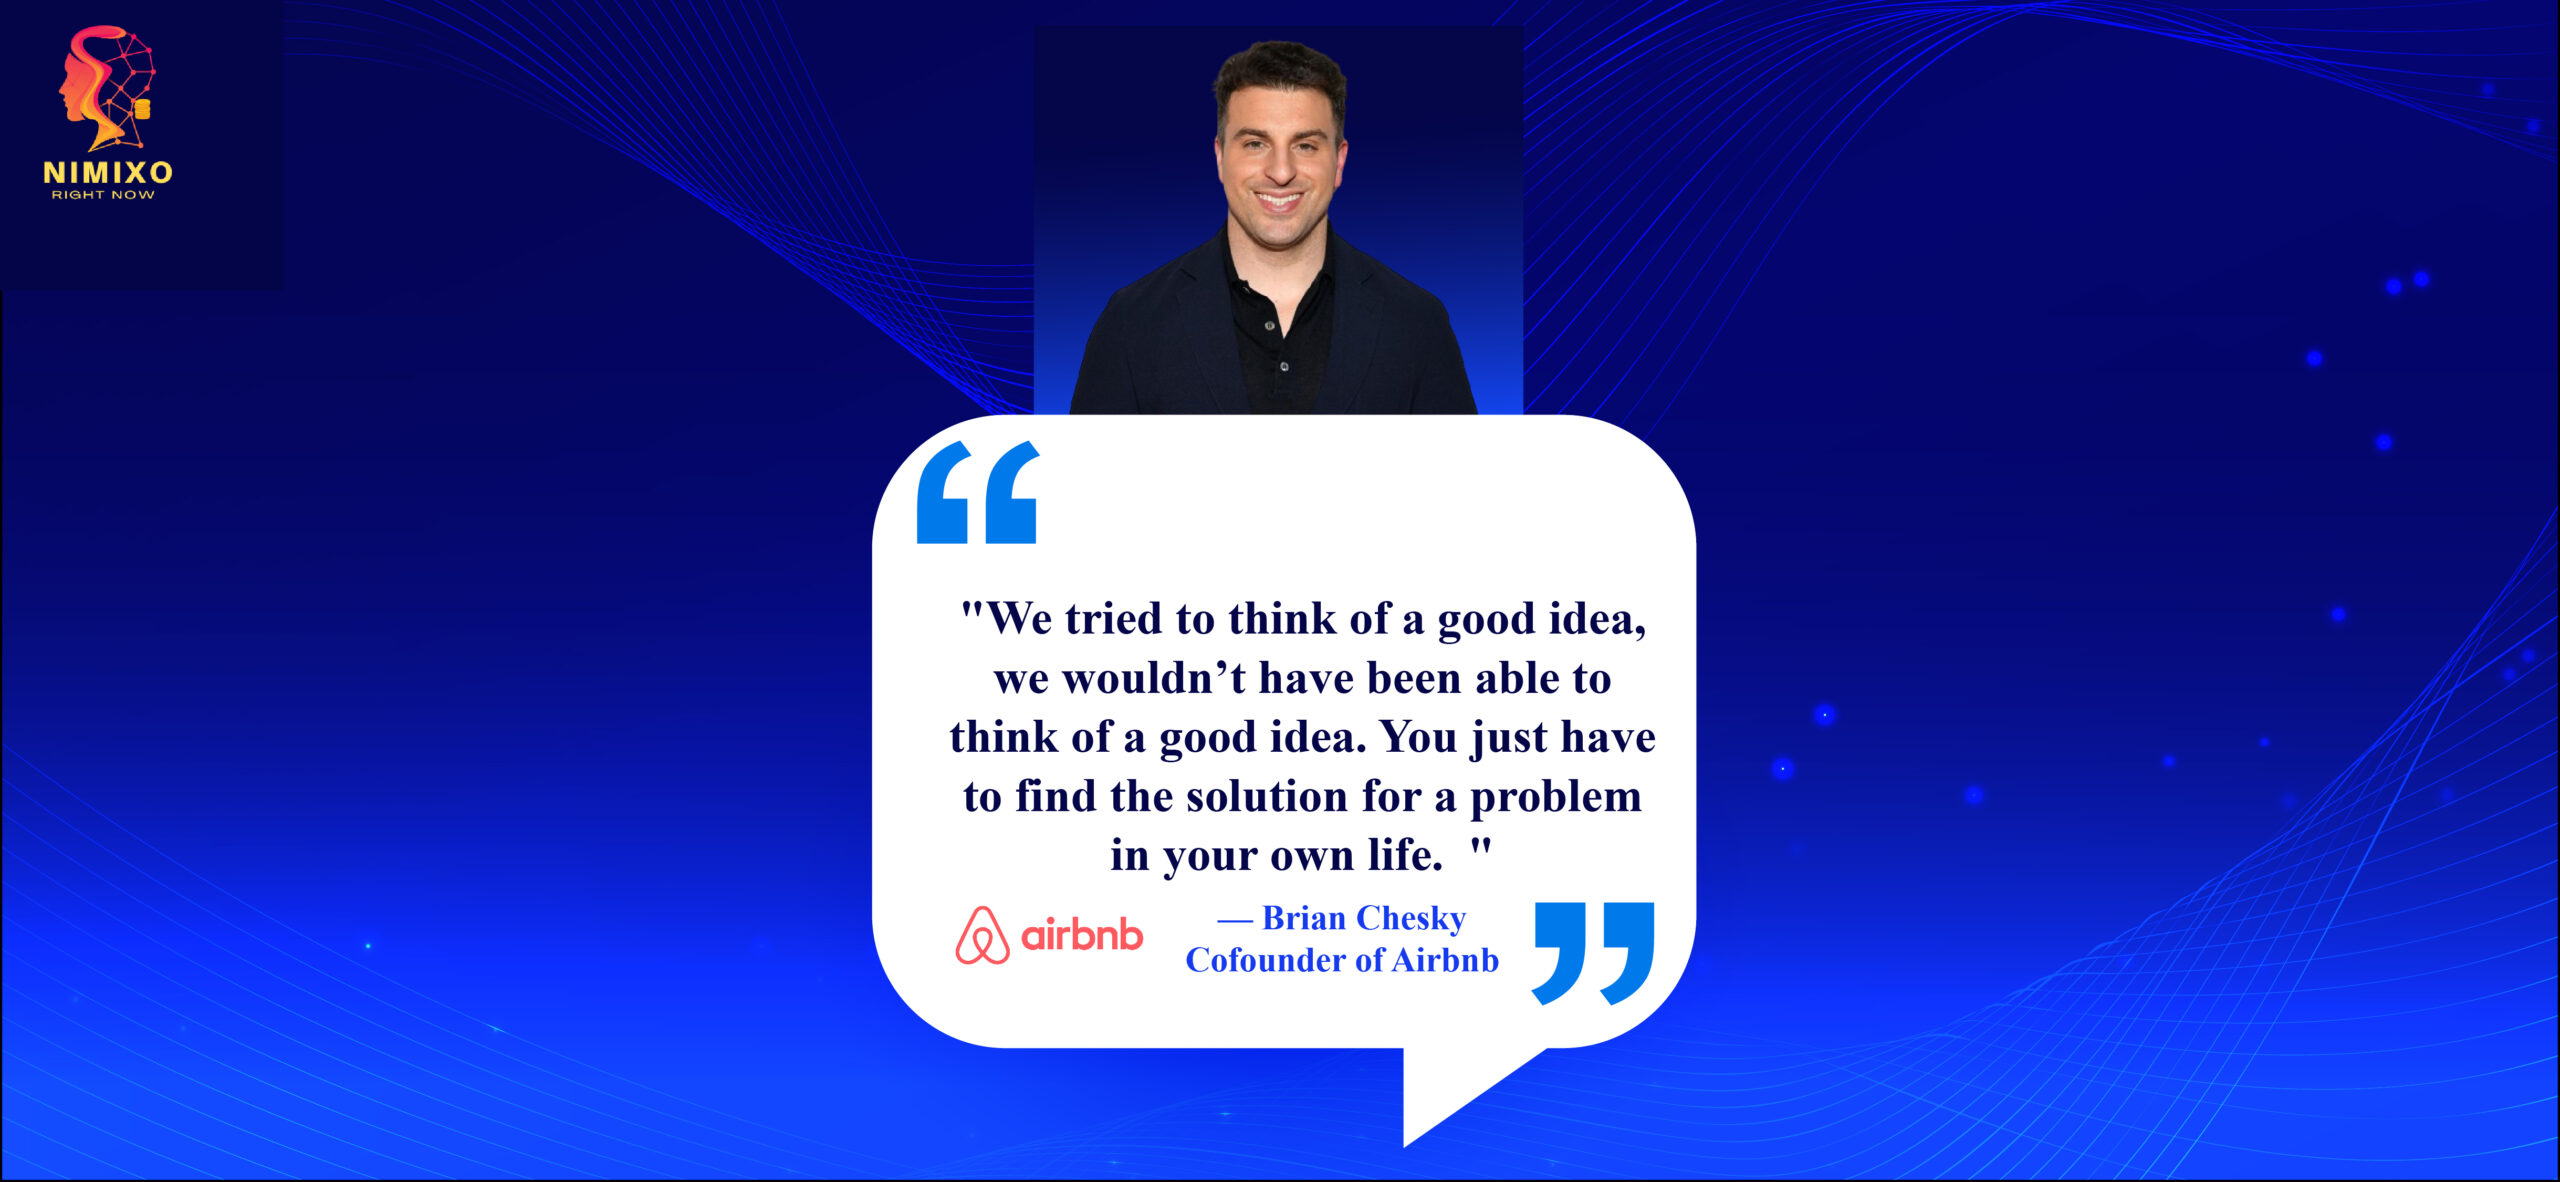 Revolutionize Your Life: The Art of Innovative Solutions. We tried to think of a good idea, we wouldn’t have been able to think of a good idea. You just have to find the solution for a problem in your own life. -Brian Chesky, Cofounder of Airbnb